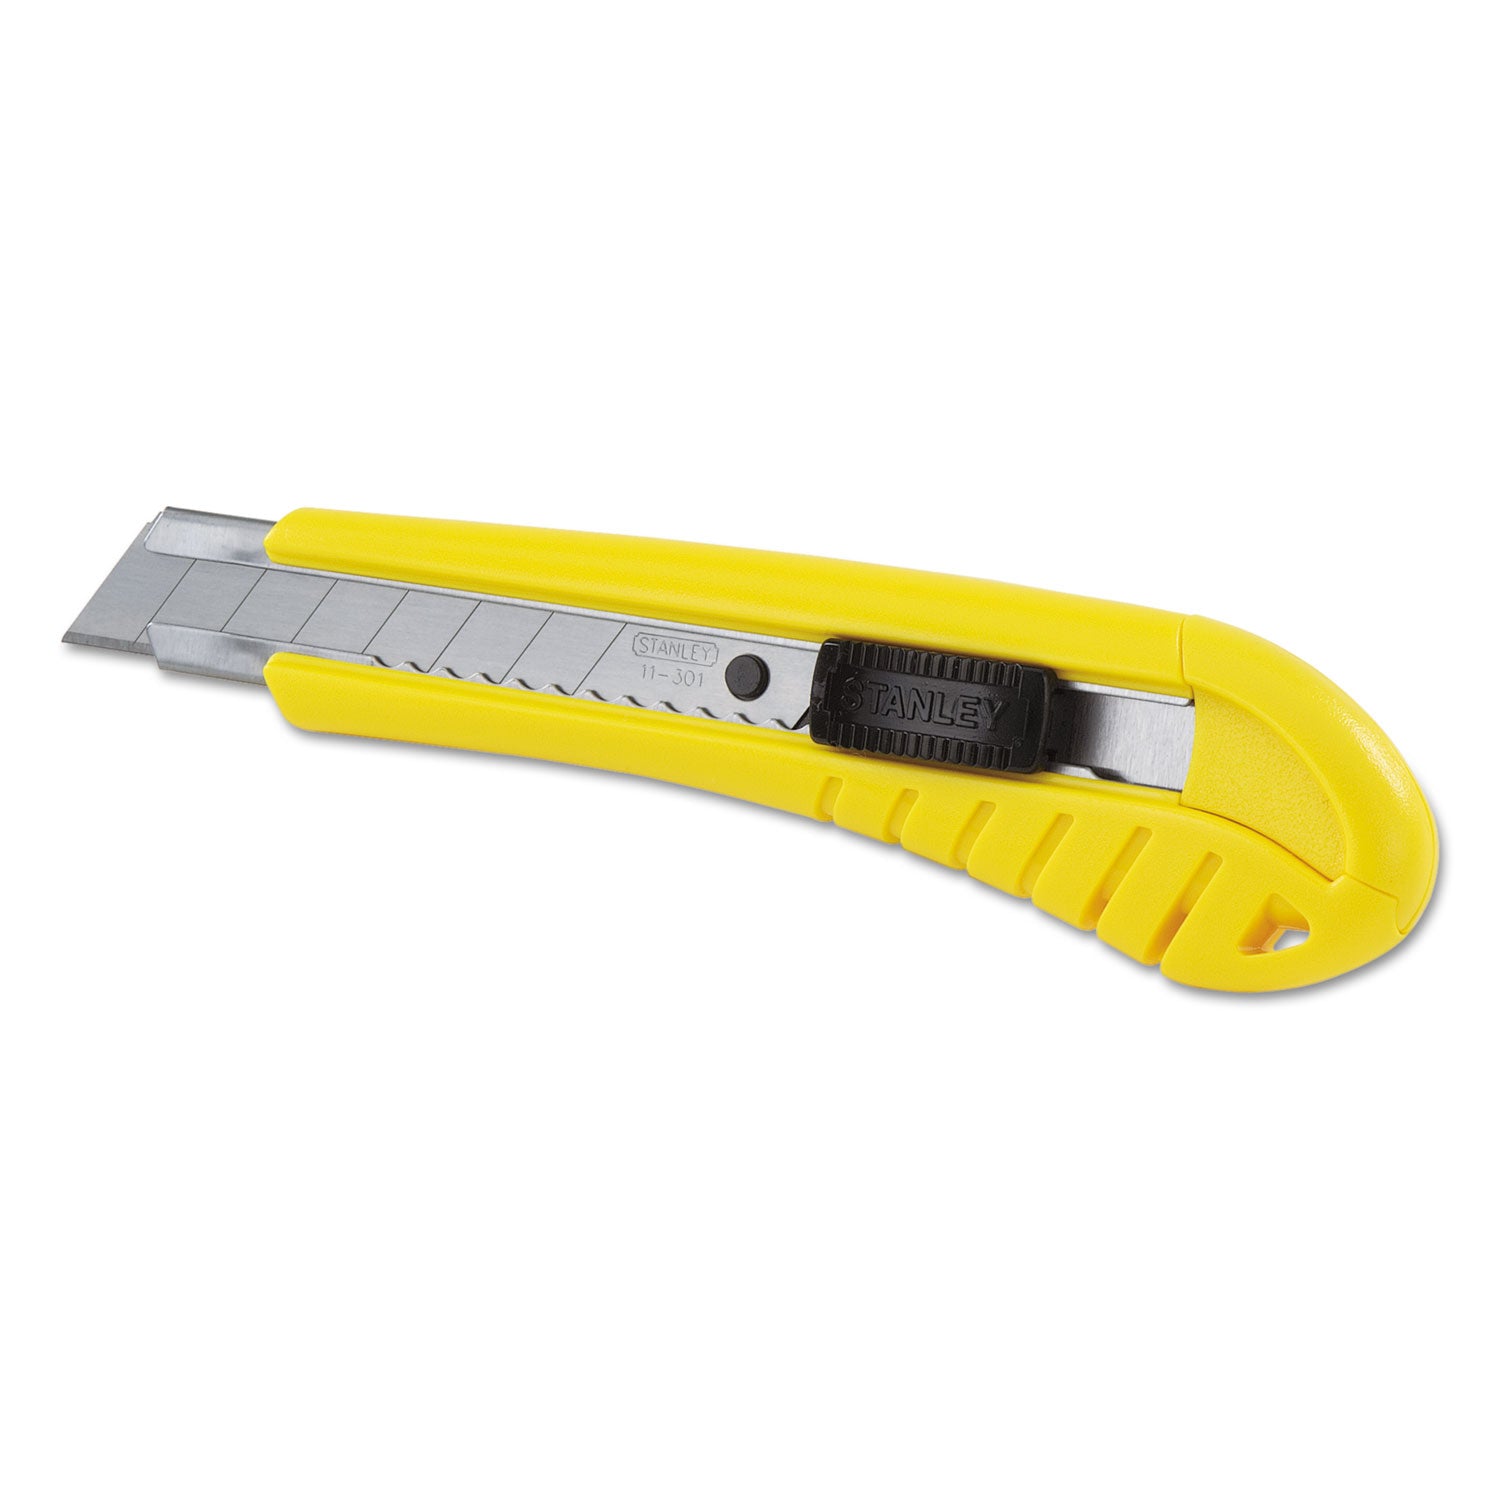 Standard Snap-Off Knife, 18 mm Blade, 6.75" Plastic Handle, Yellow - 